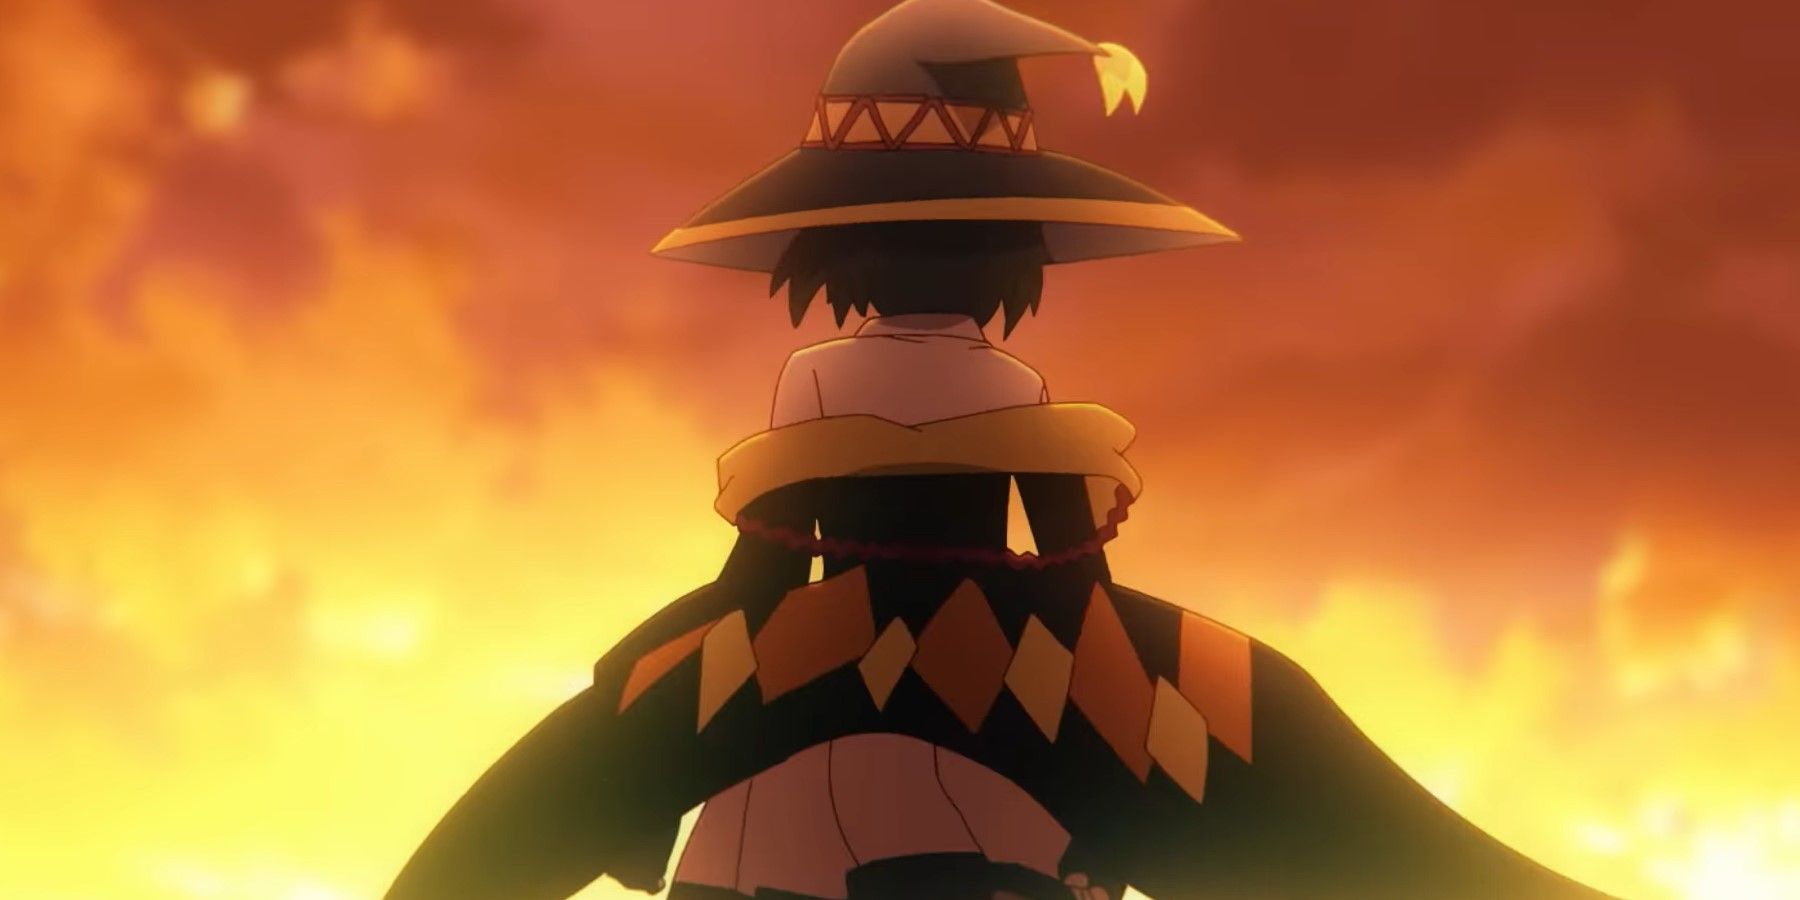 KonoSuba's Megumin spin-off anime confirms 2023 release in new trailer